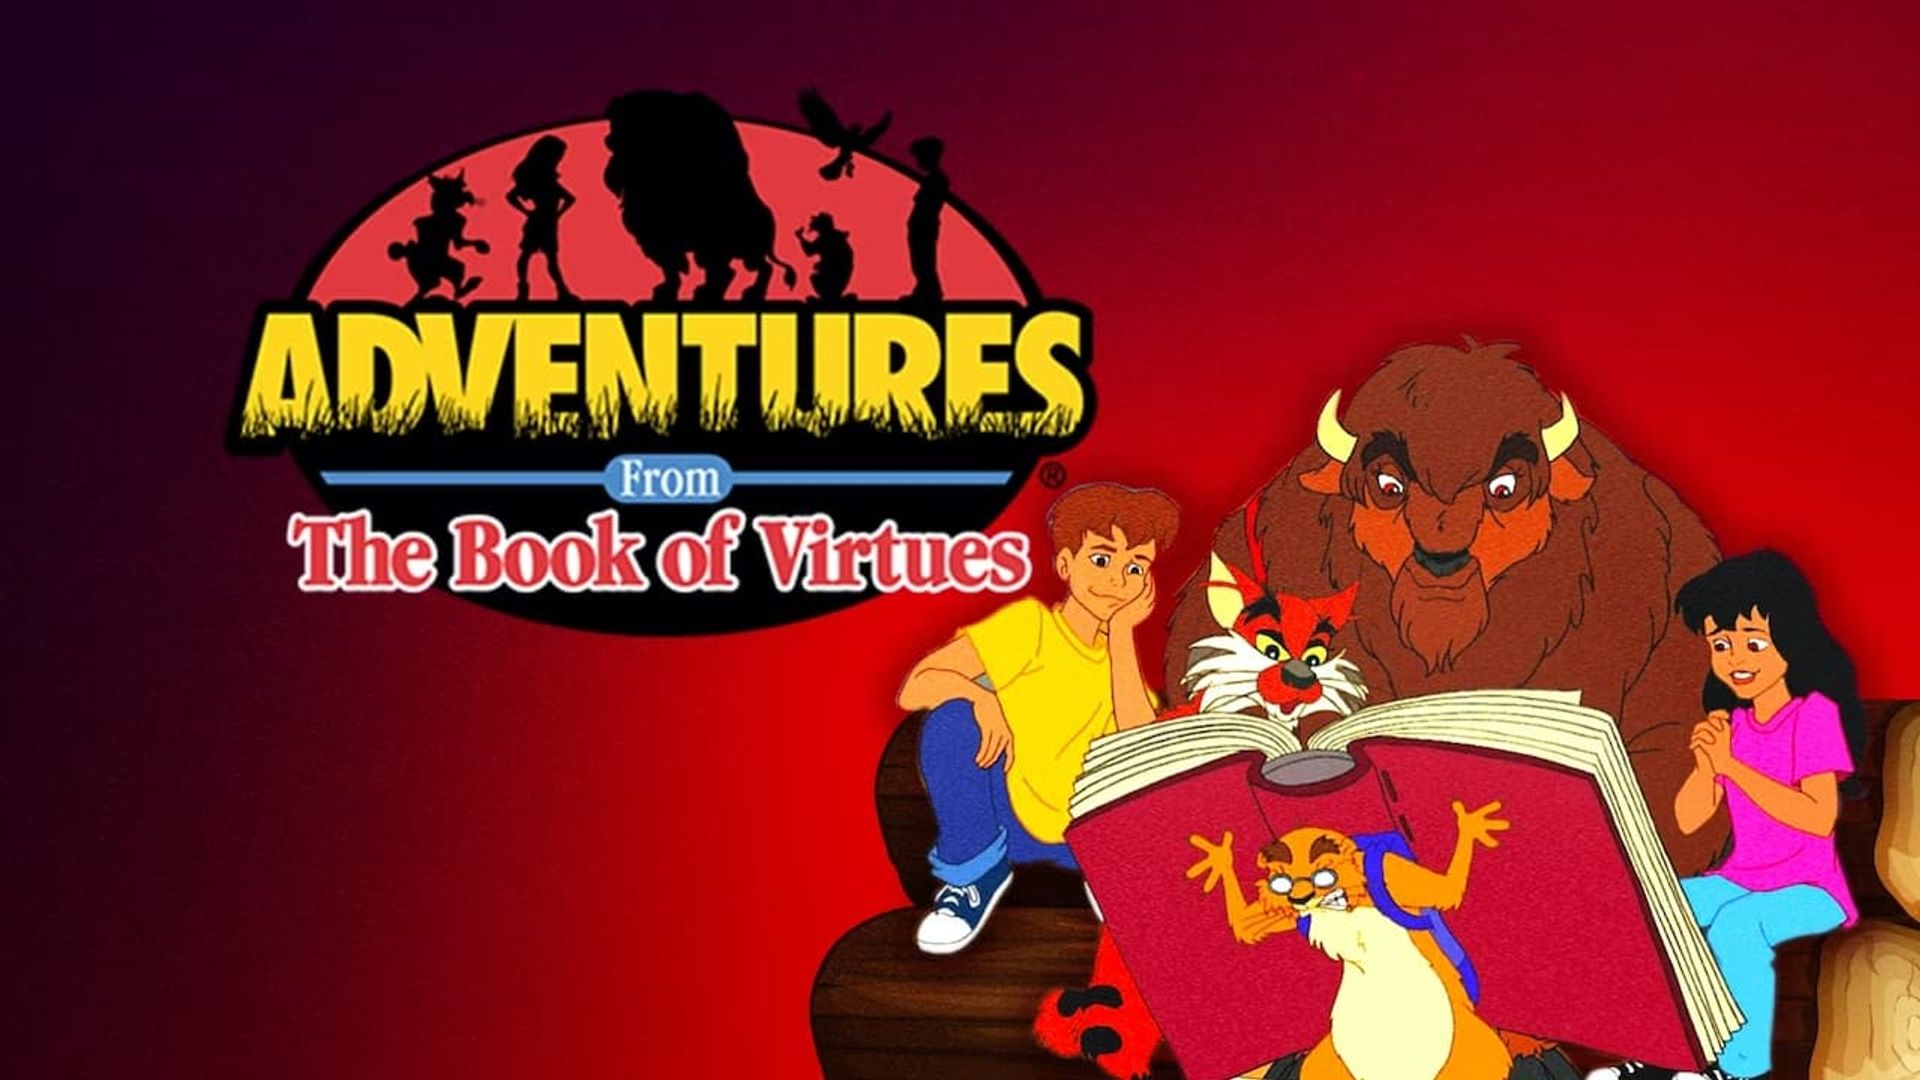 Adventures from the Book of Virtues background